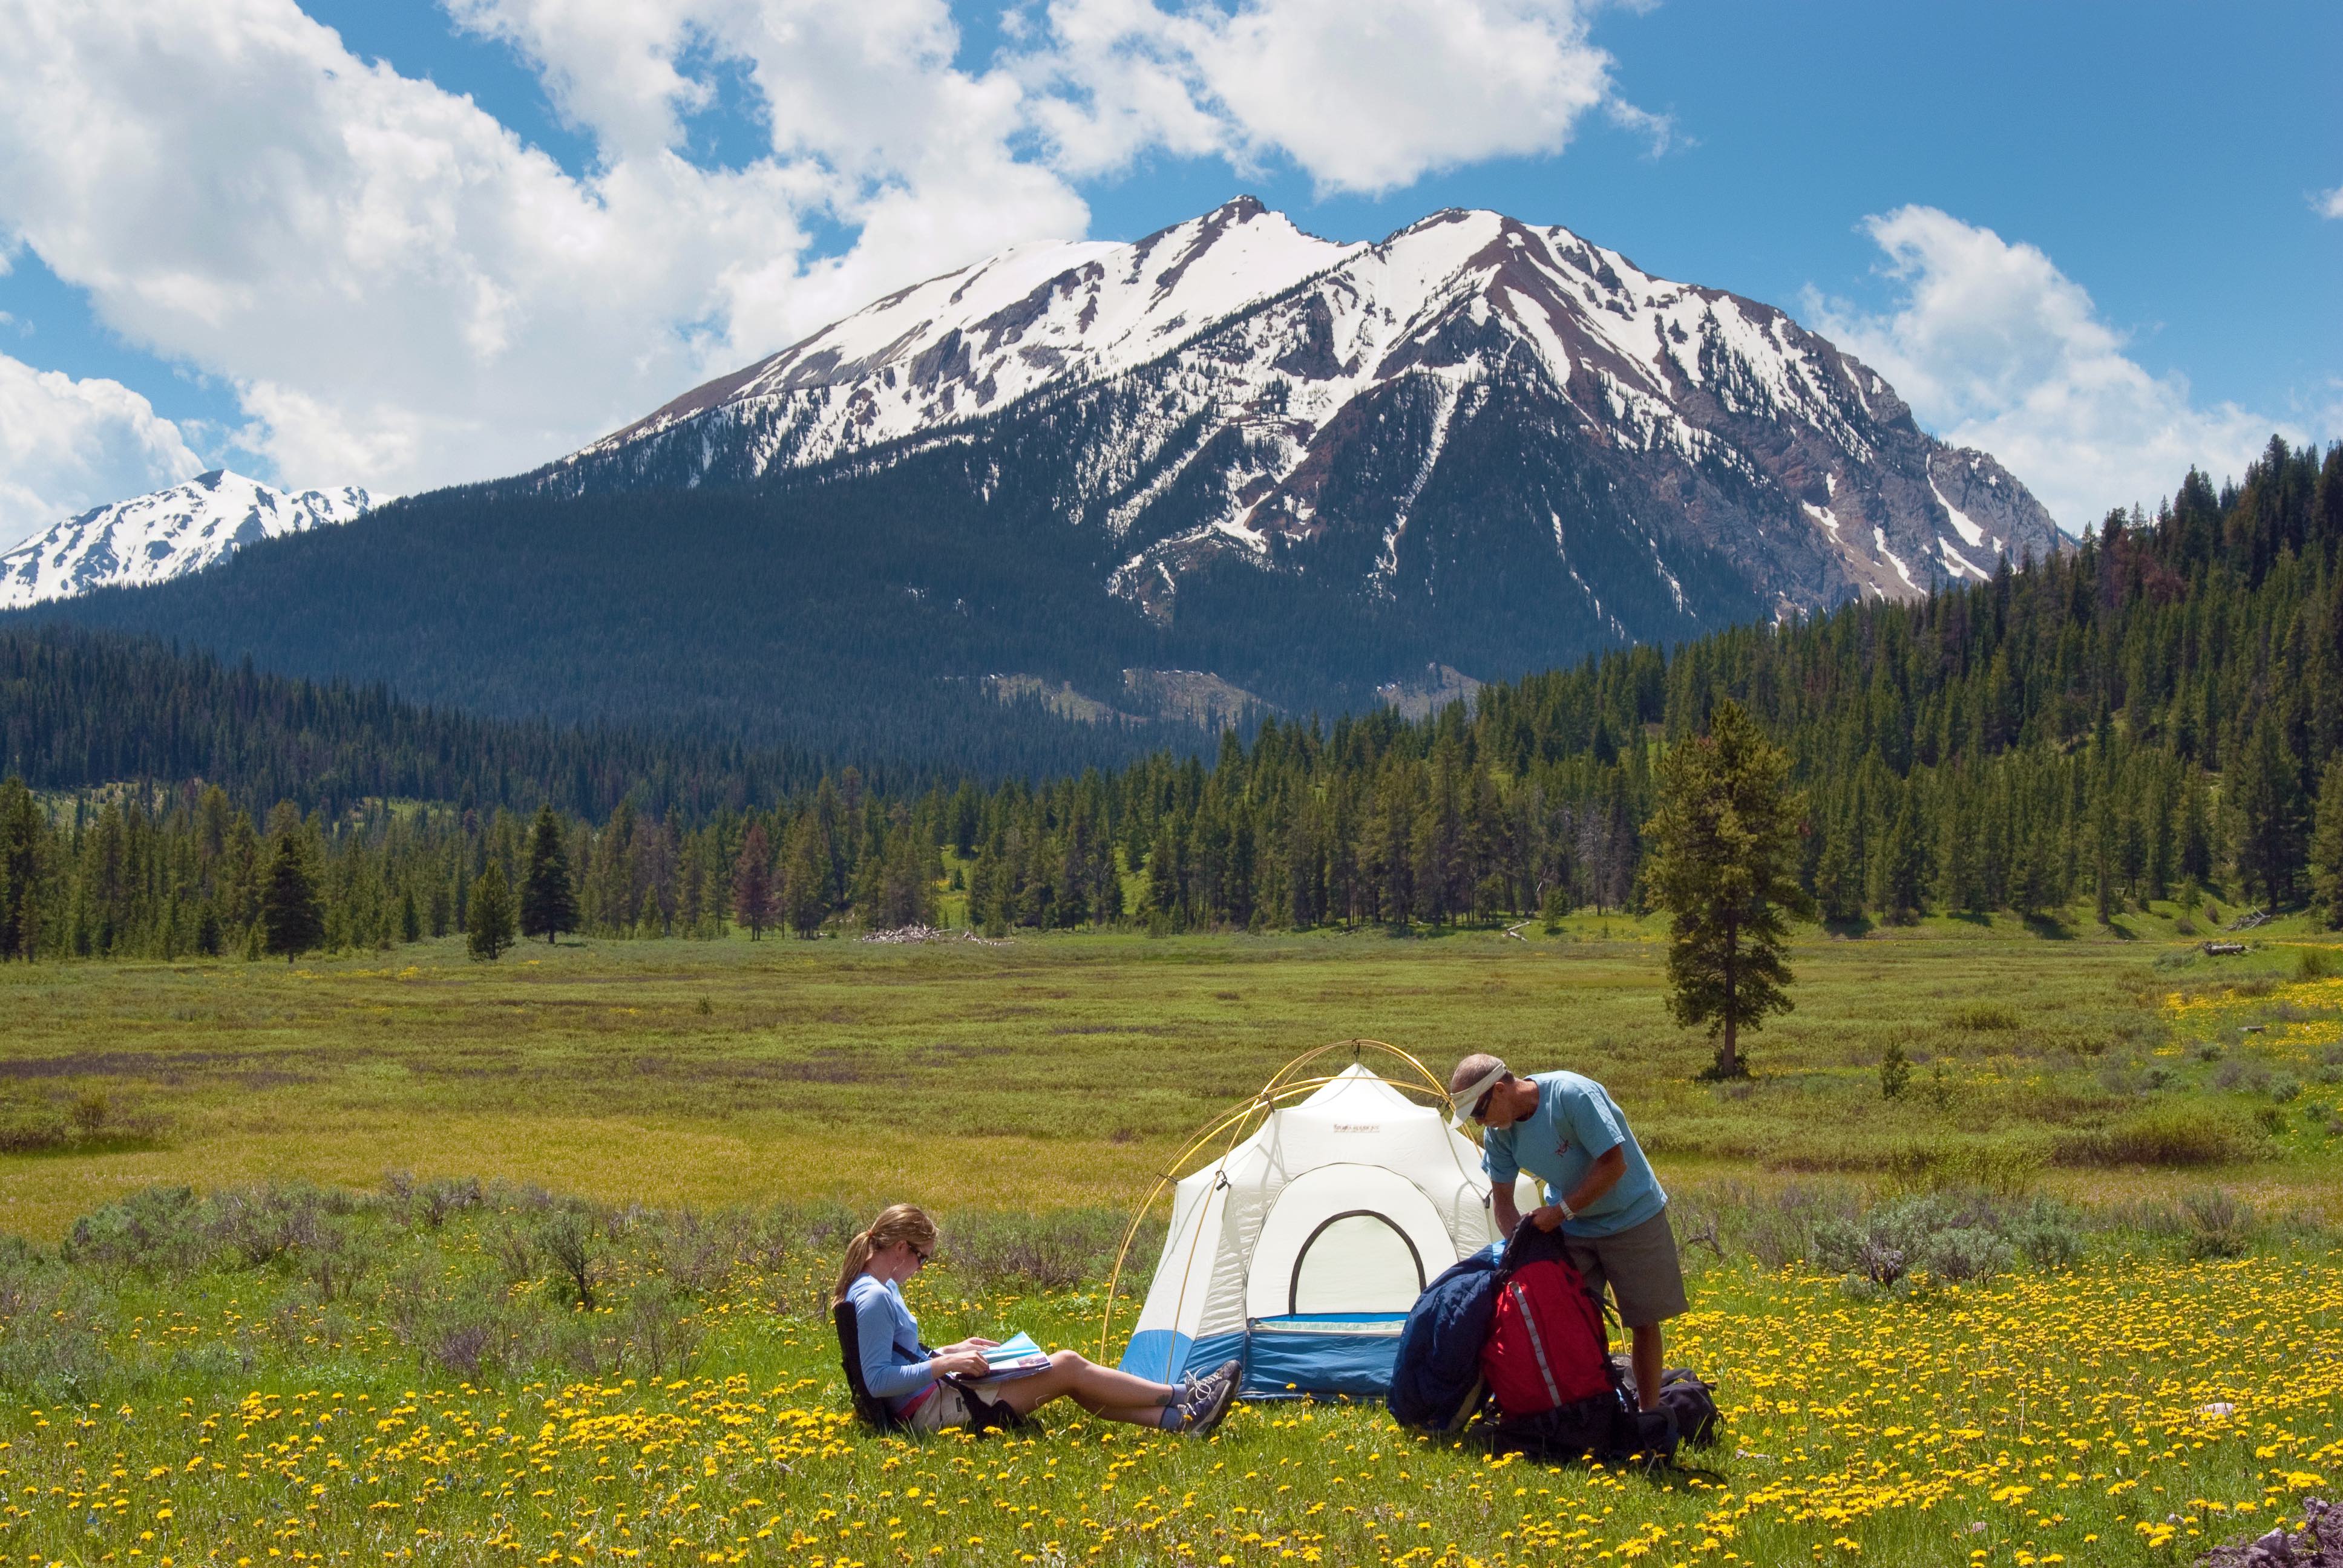 Campers in the Gallatin National Forest near Big Sky, Montana in Yellowstone Country